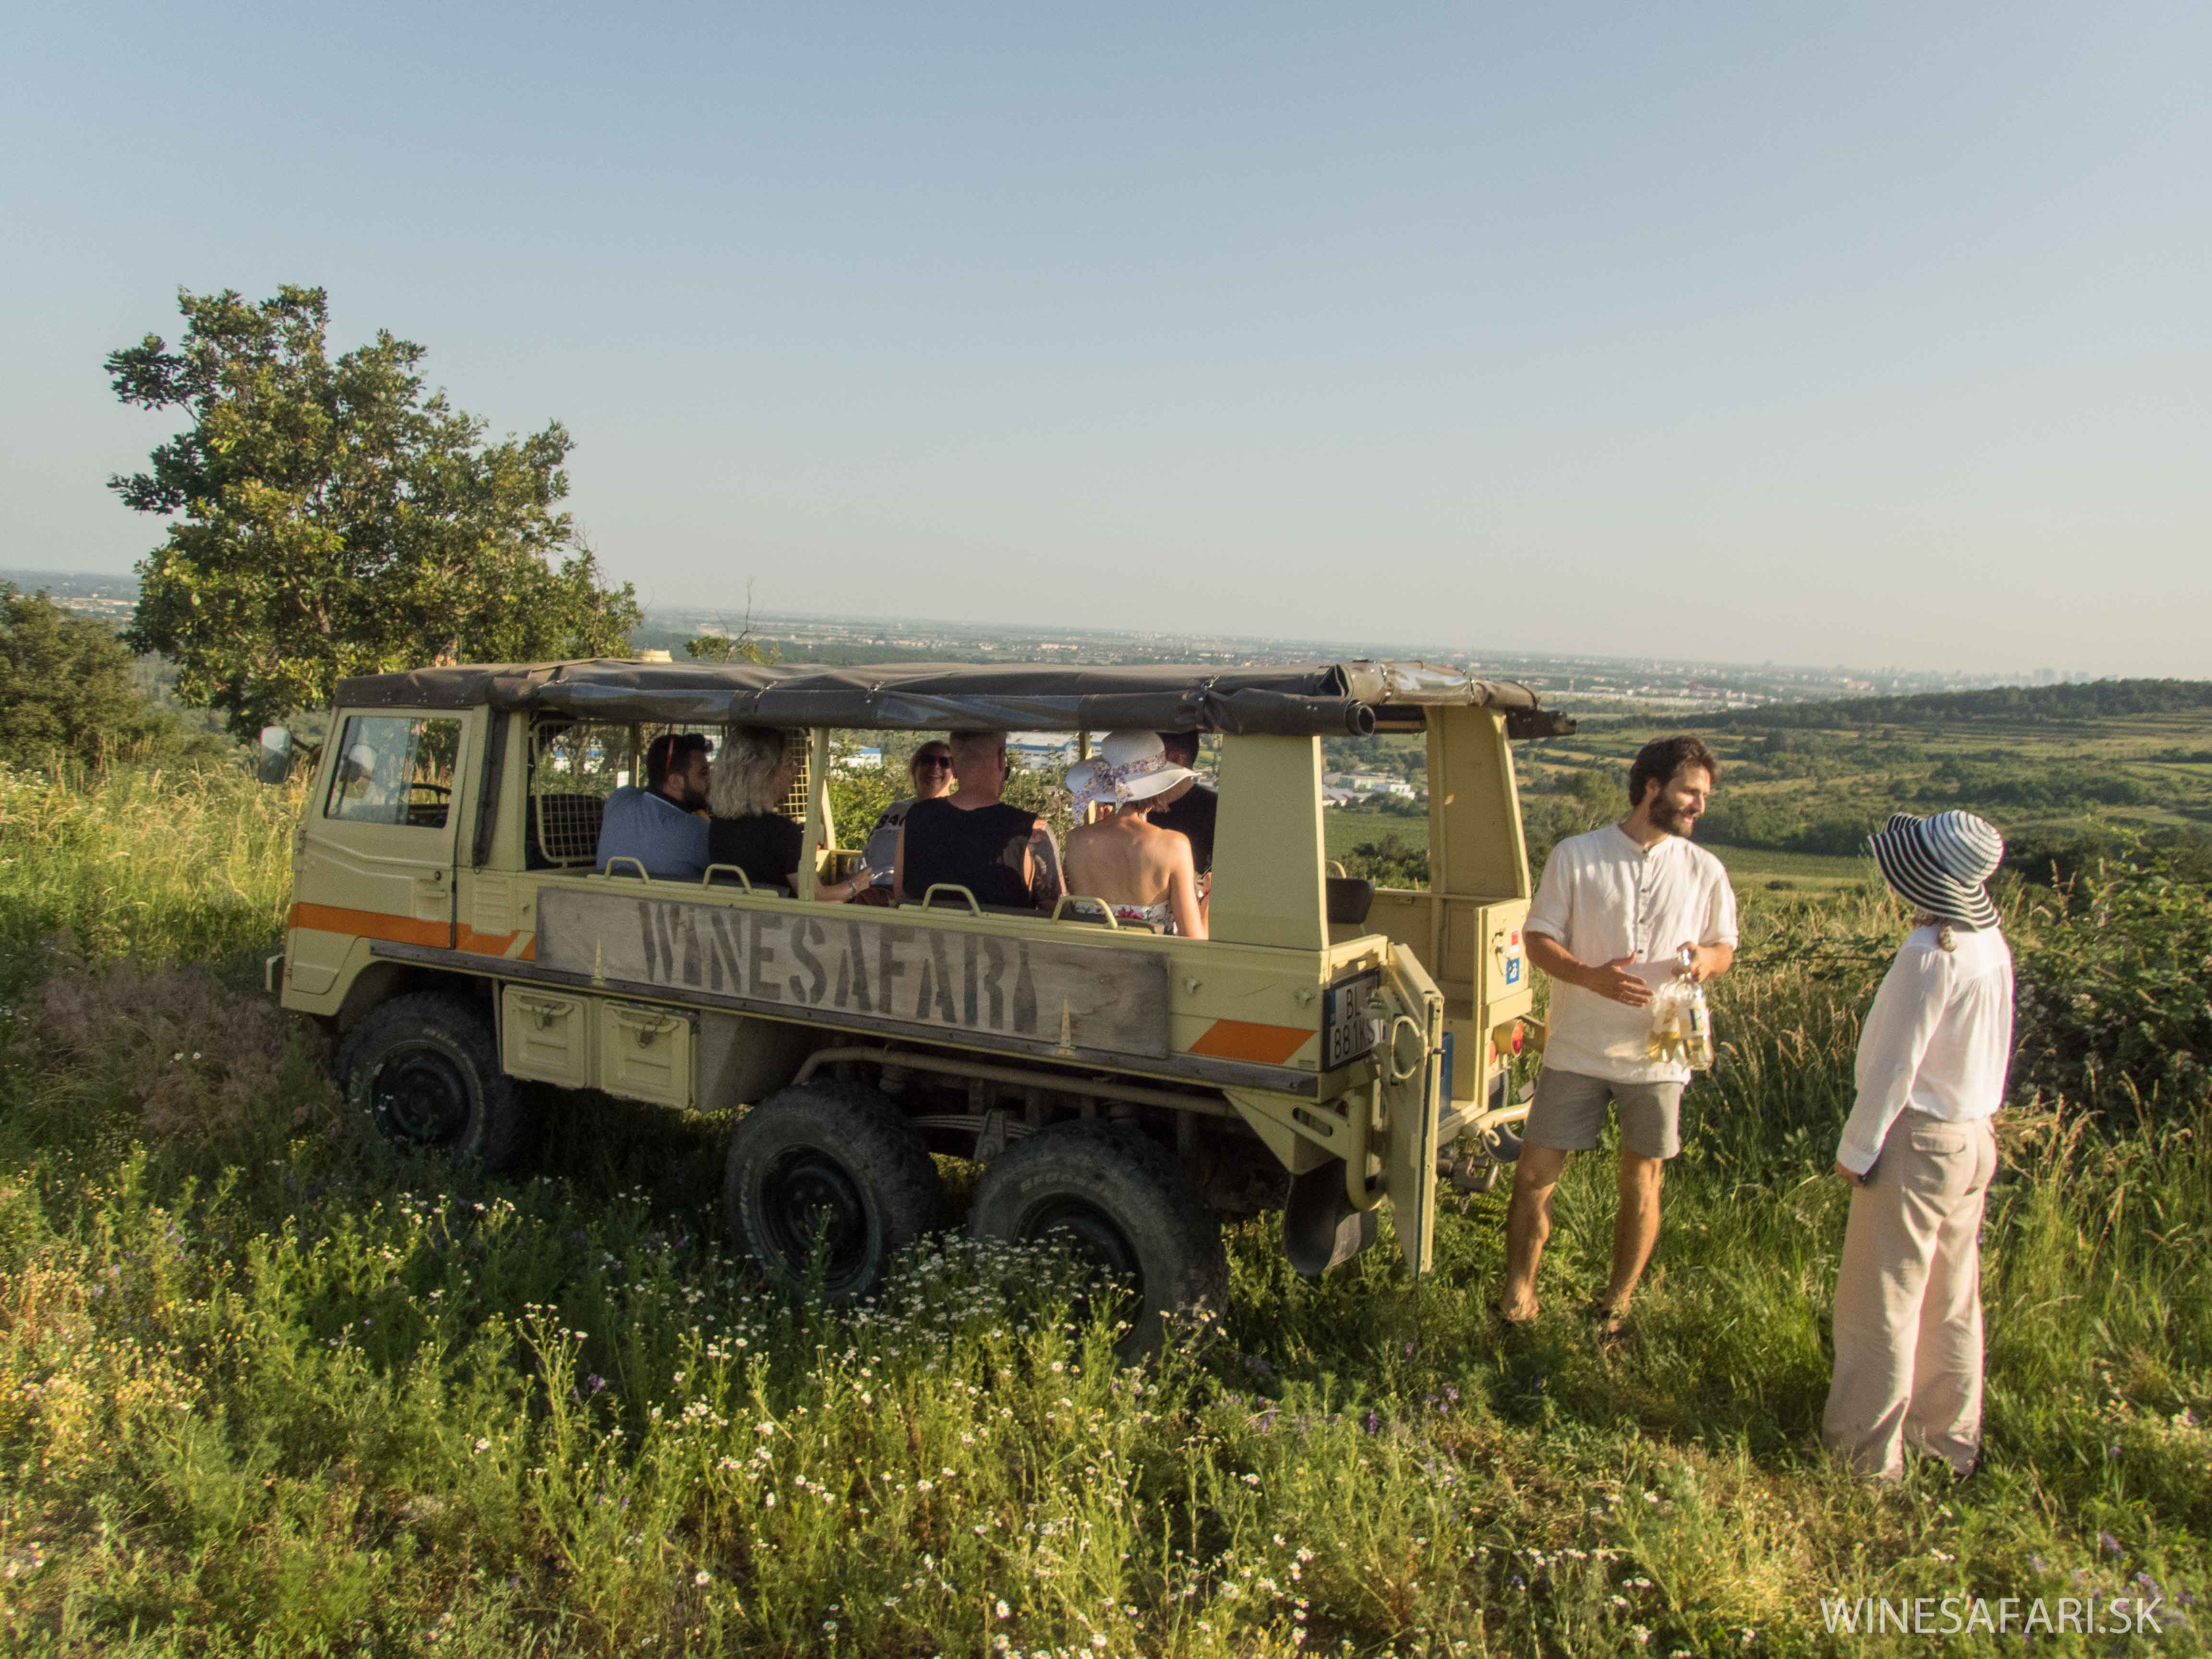 WINESAFARI Svaty Jur Slovakia local glass of wine tasting attraction the best guided tour outdoor fun Pinzgauer new experience vineyards in Bratislava area close to Vienna Austria in Central Europe enjoy sun and wine in slovakia close to bratislava